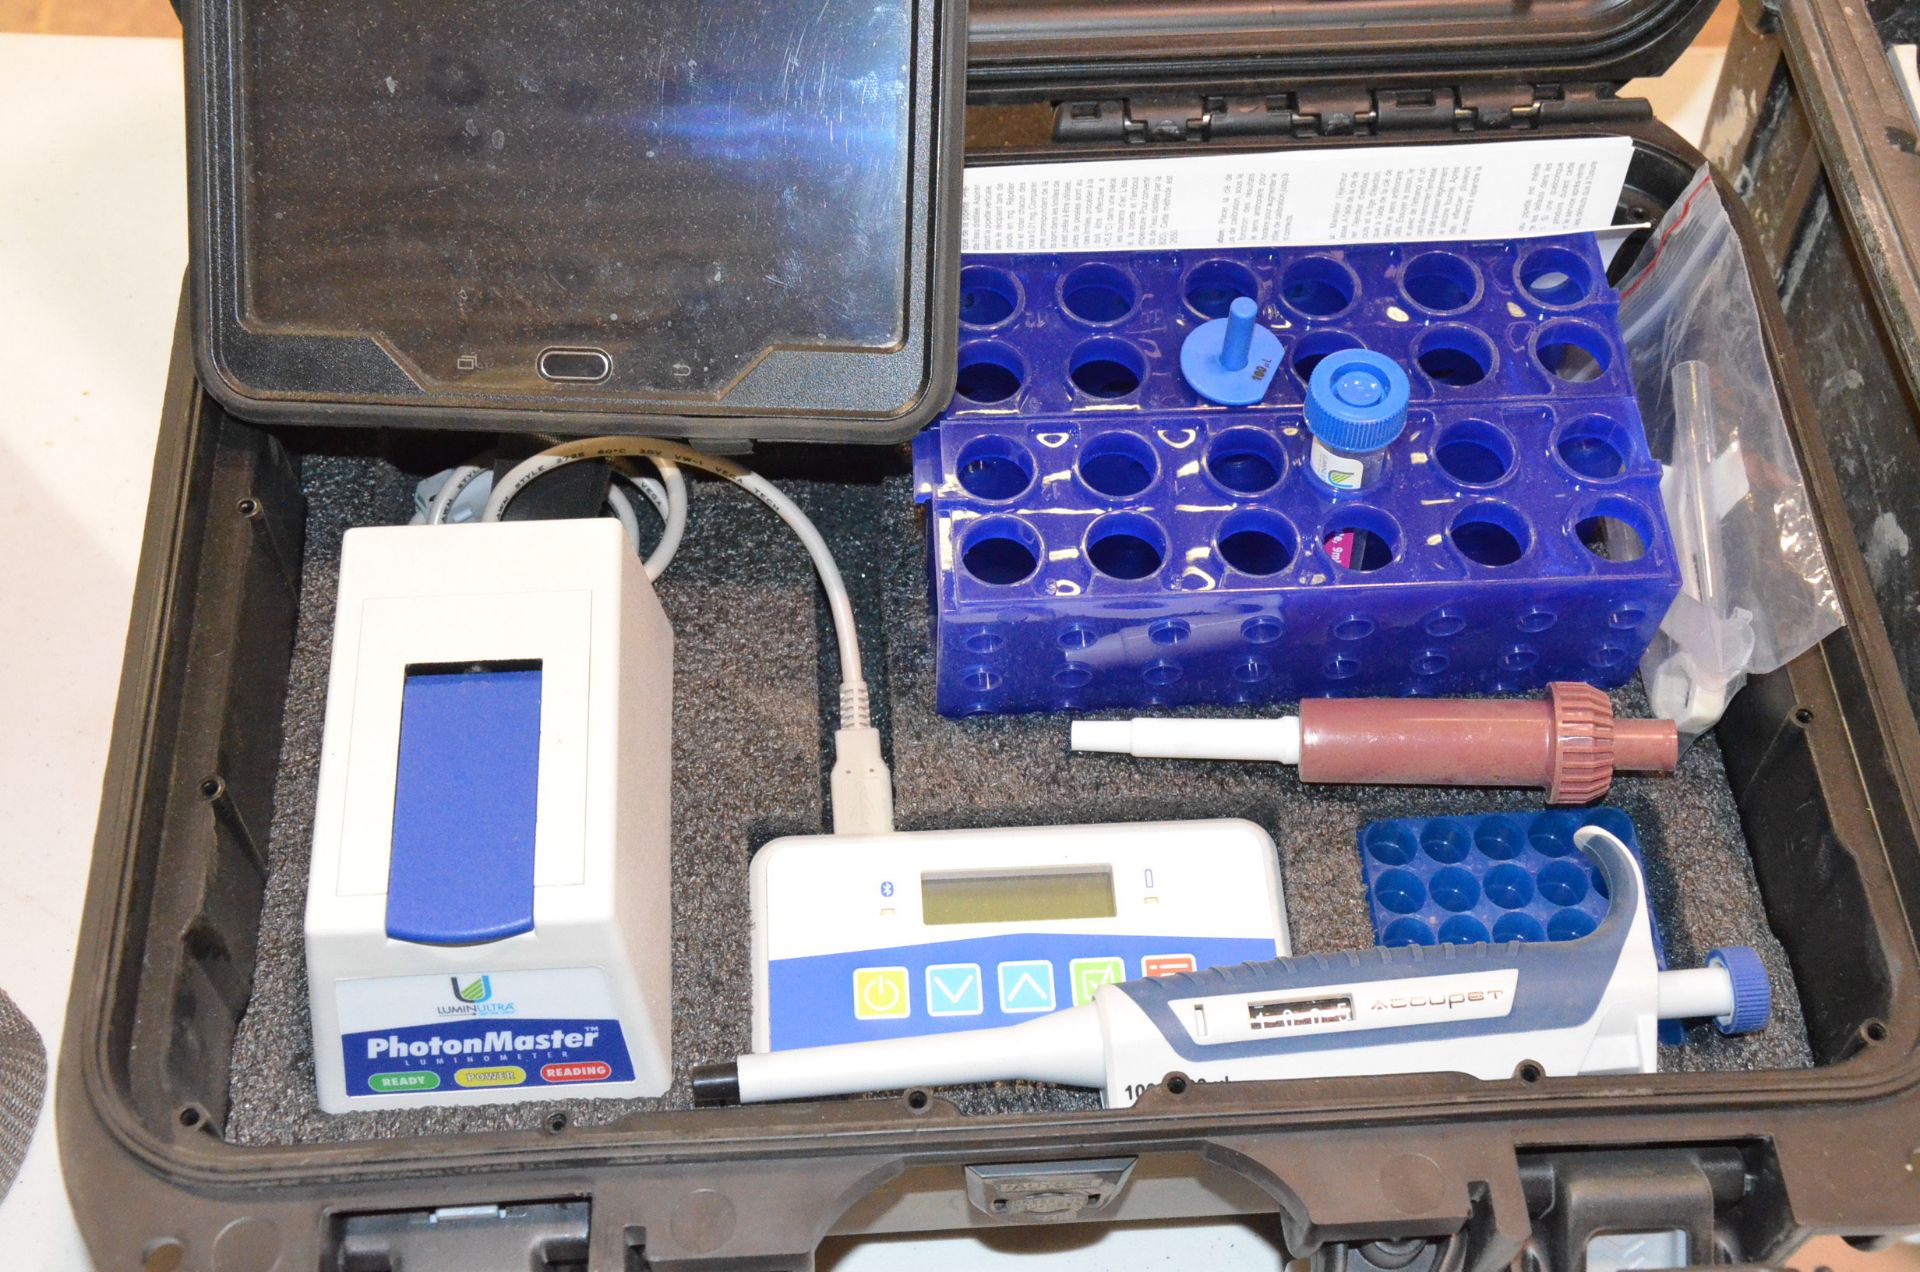 LUMINULTRA PHOTONMASTER MICROBIAL TESTING SYSTEM WITH SAMSUNG TABLET, S/N PM11231 - Image 2 of 6